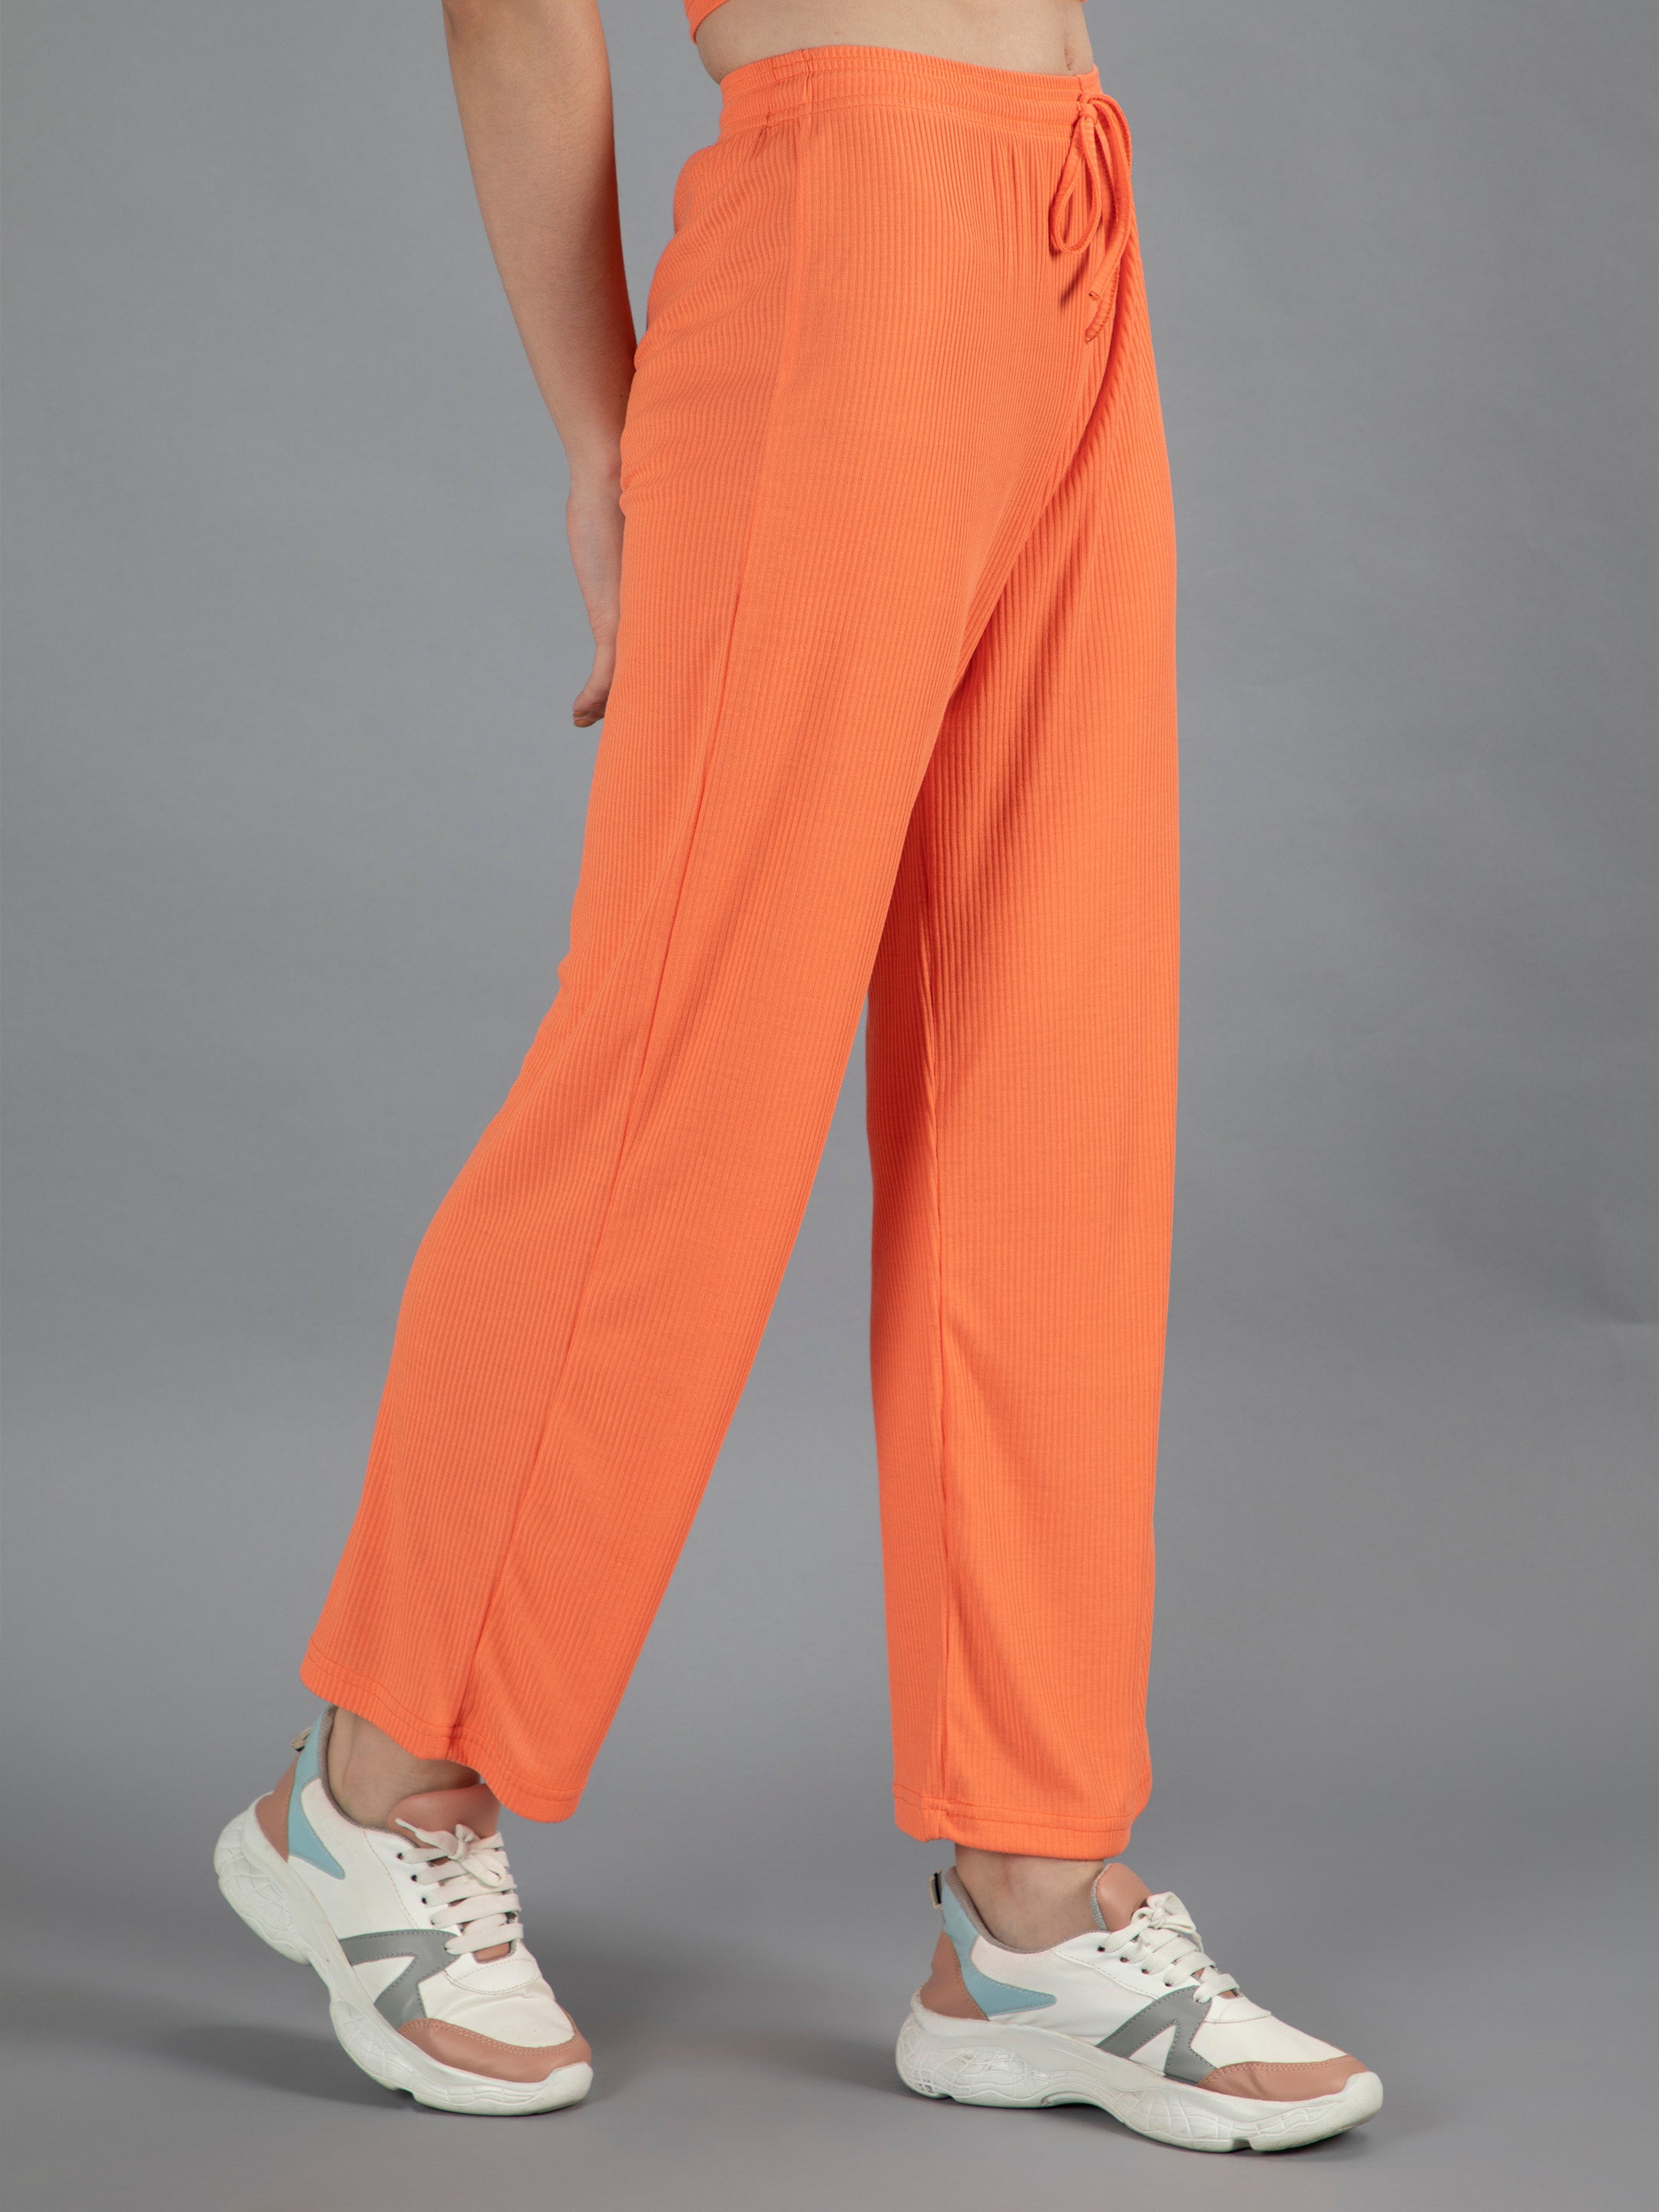 Women Drawstring Tie Pants Spring Summer Cotton And Linen Trousers With  Pockets Button at Rs 1999.00 | Cotton Trousers | ID: 2852290316648